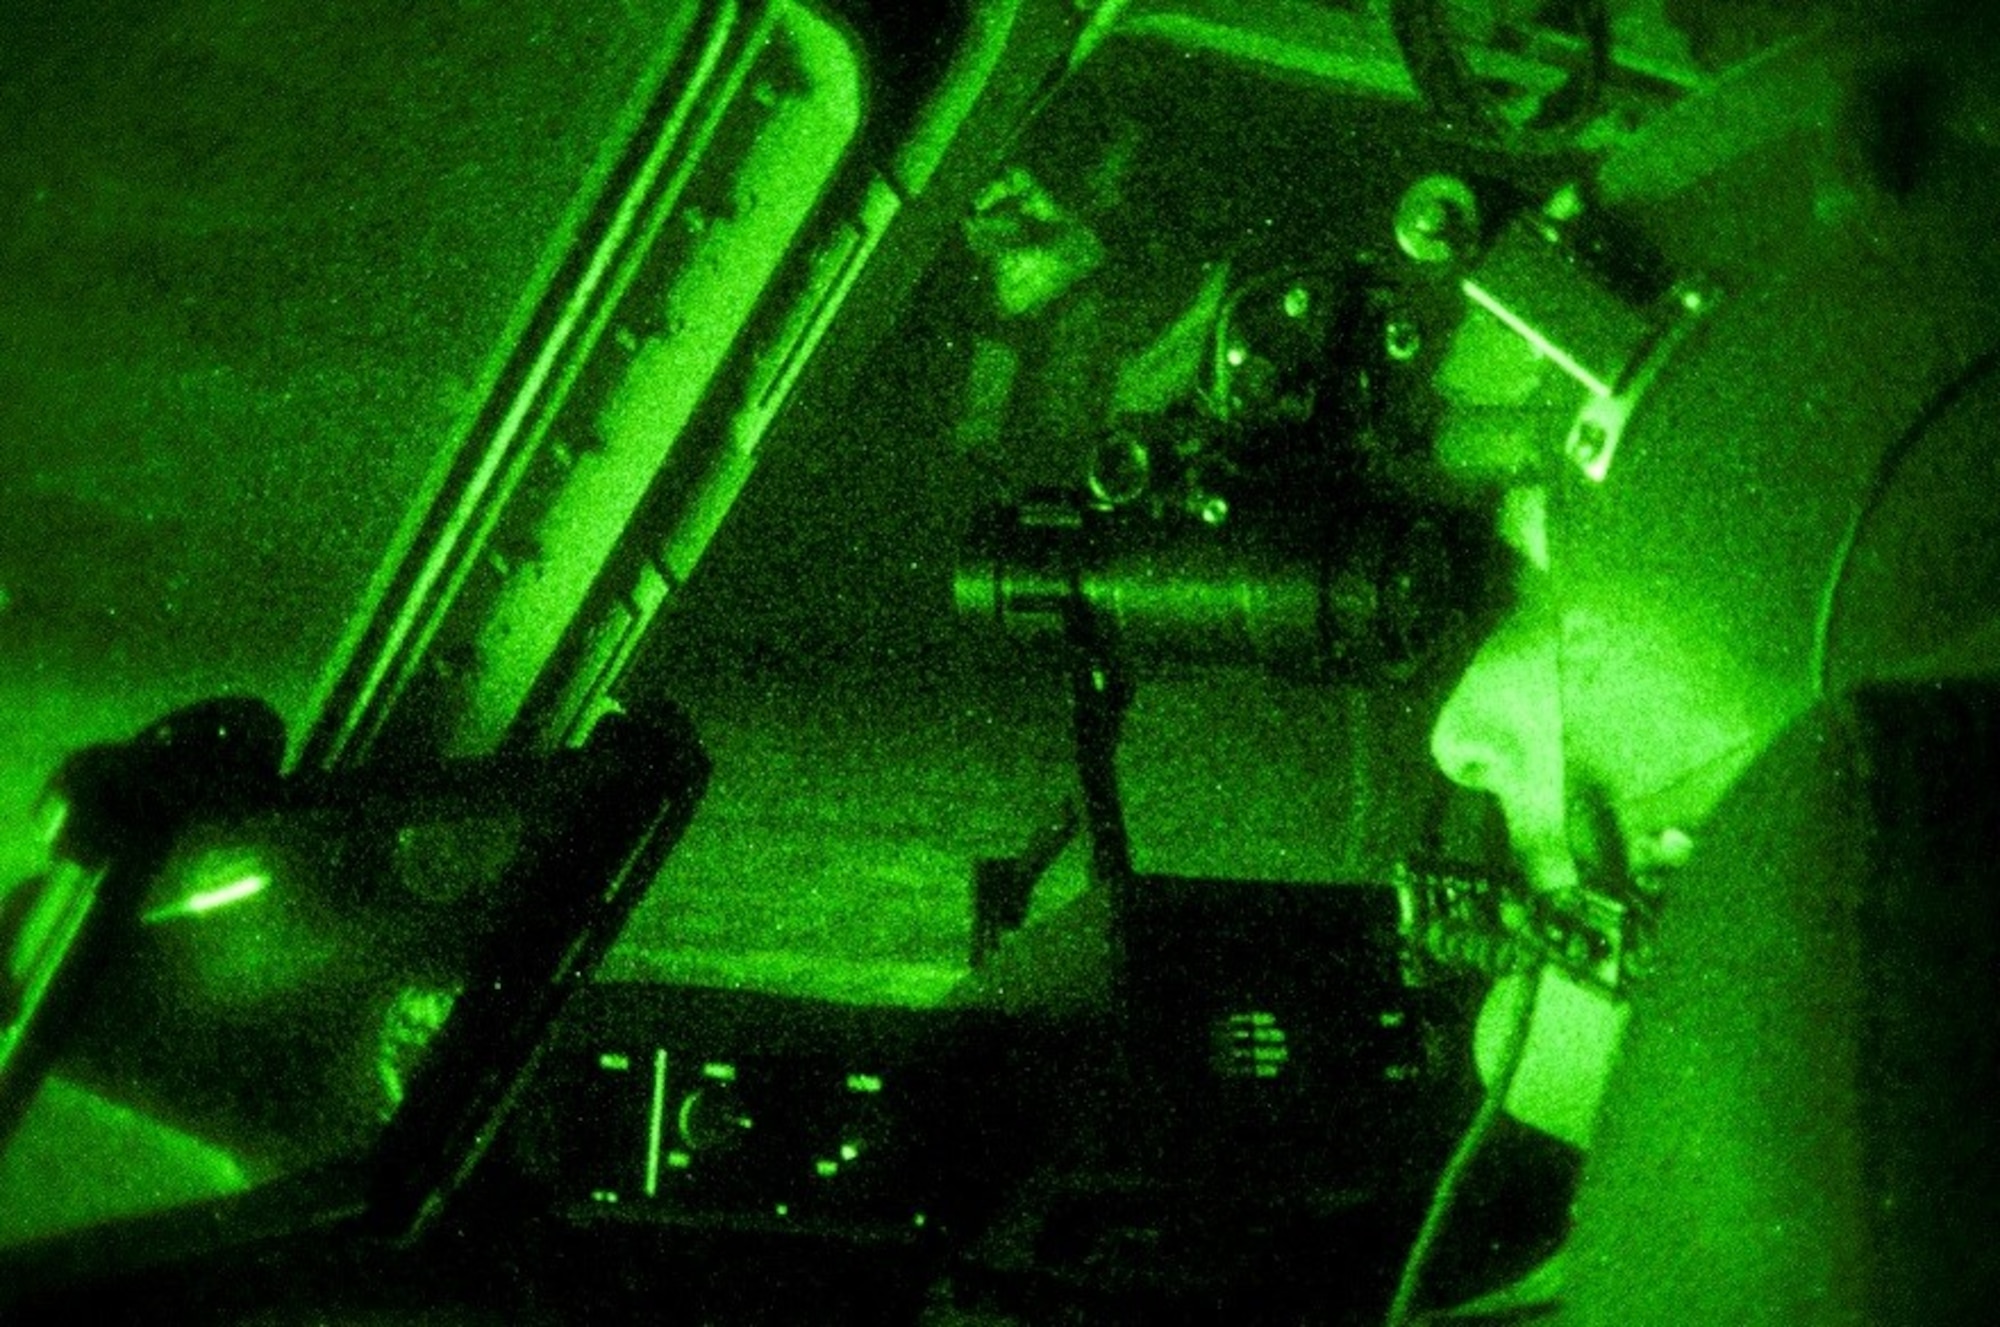 U.S. Air Force Capt. Andrew Rast, 304th Expeditionary Airlift Squadron pilot, uses night vision goggles to taxi a C-17 Globemaster III aircraft after landing at Pegasus Ice Runway, Antarctica during Operation Deep Freeze (ODF), July 15, 2016. ODF is the logistical support provided by the Department of Defense to the U.S. Antarctic Program (USAP). This includes the coordination of strategic inter-theater airlift, tactical intra-theater airlift and airdrop, and transportation requirements supporting the National Science Foundation, the lead agency for the USAP. (U.S. Air Force Reserve photo by Staff Sgt. Madelyn McCullough)